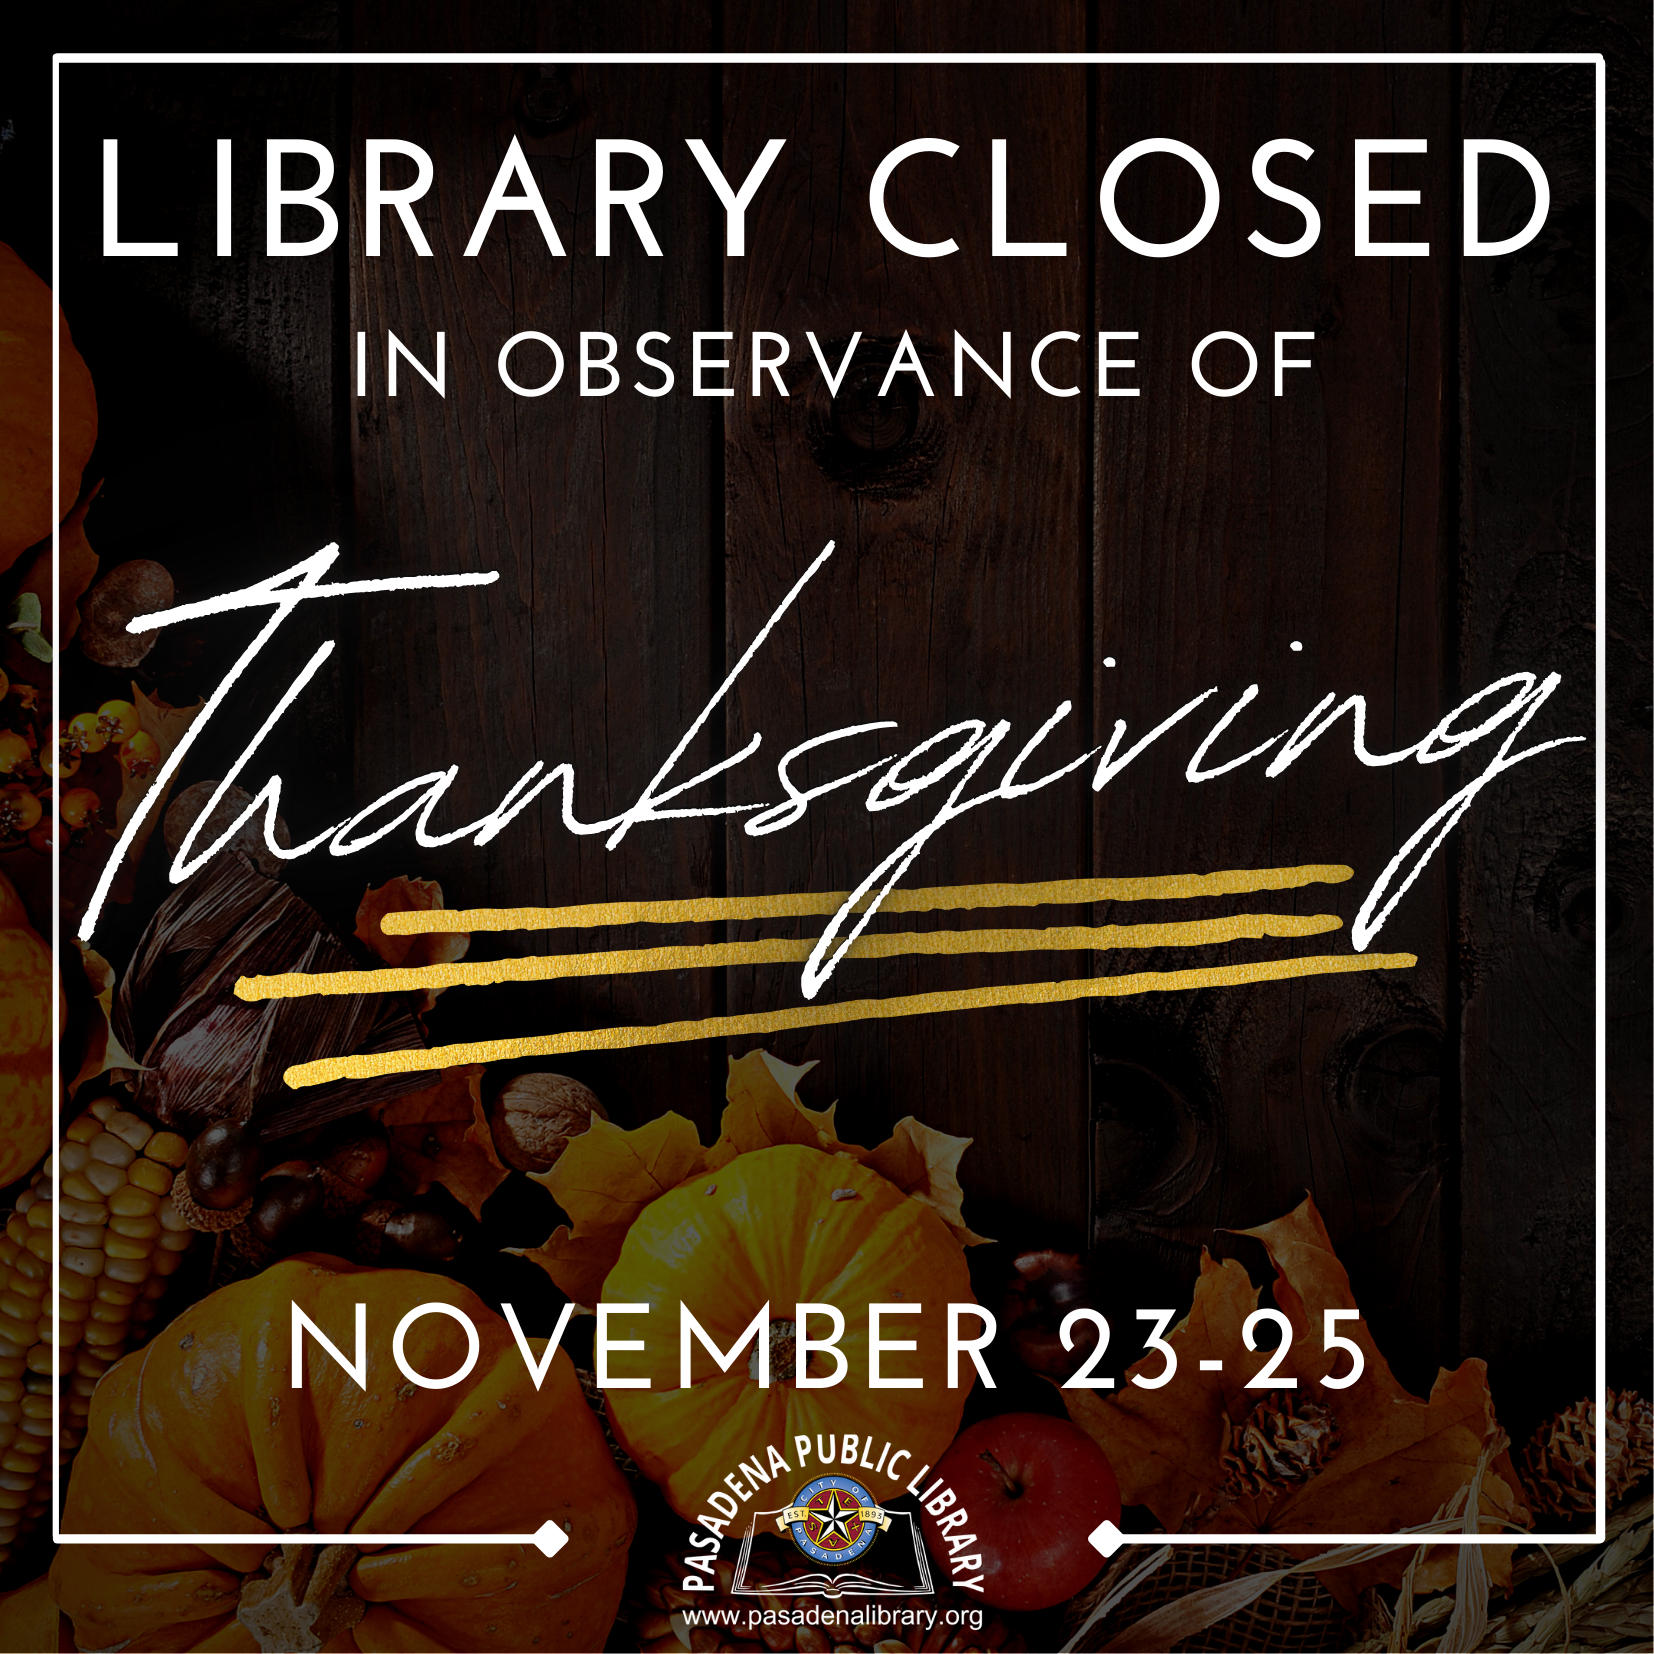 The Pasadena Public Library will be CLOSED Thursday, November 23 through Saturday, November 25 in observance of THANKSGIVING!  Library locations will re-open on Monday, November 27 at 10:00AM.